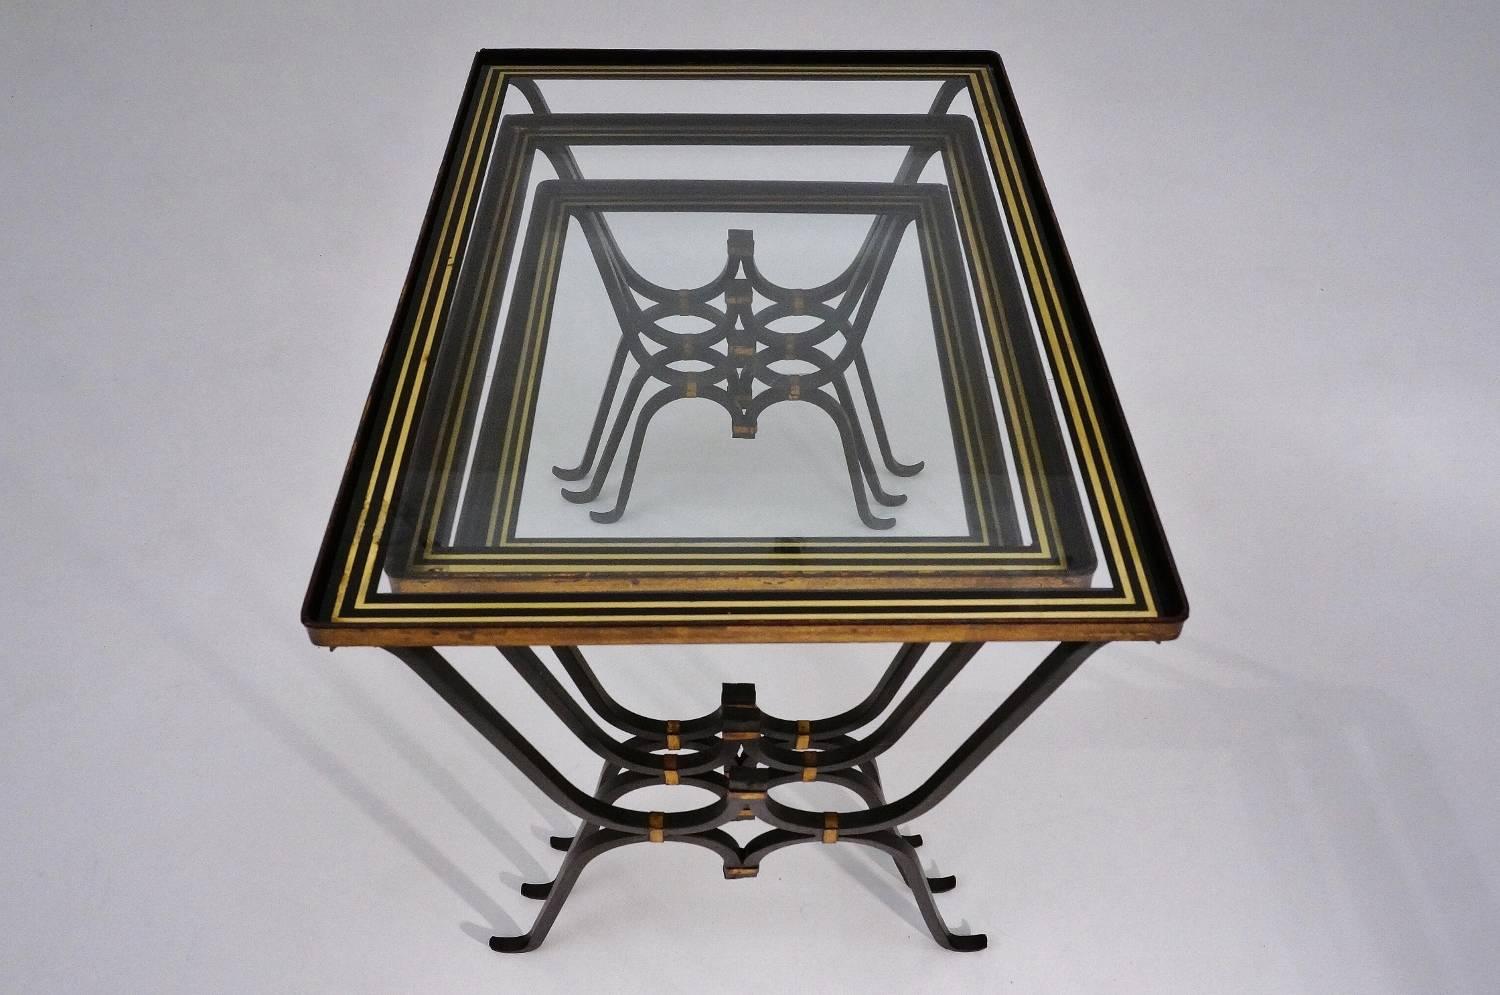 Mid-20th Century Rene Drouet Nesting Tables, Gilt Iron and Gold Leaf Glass Tops, French